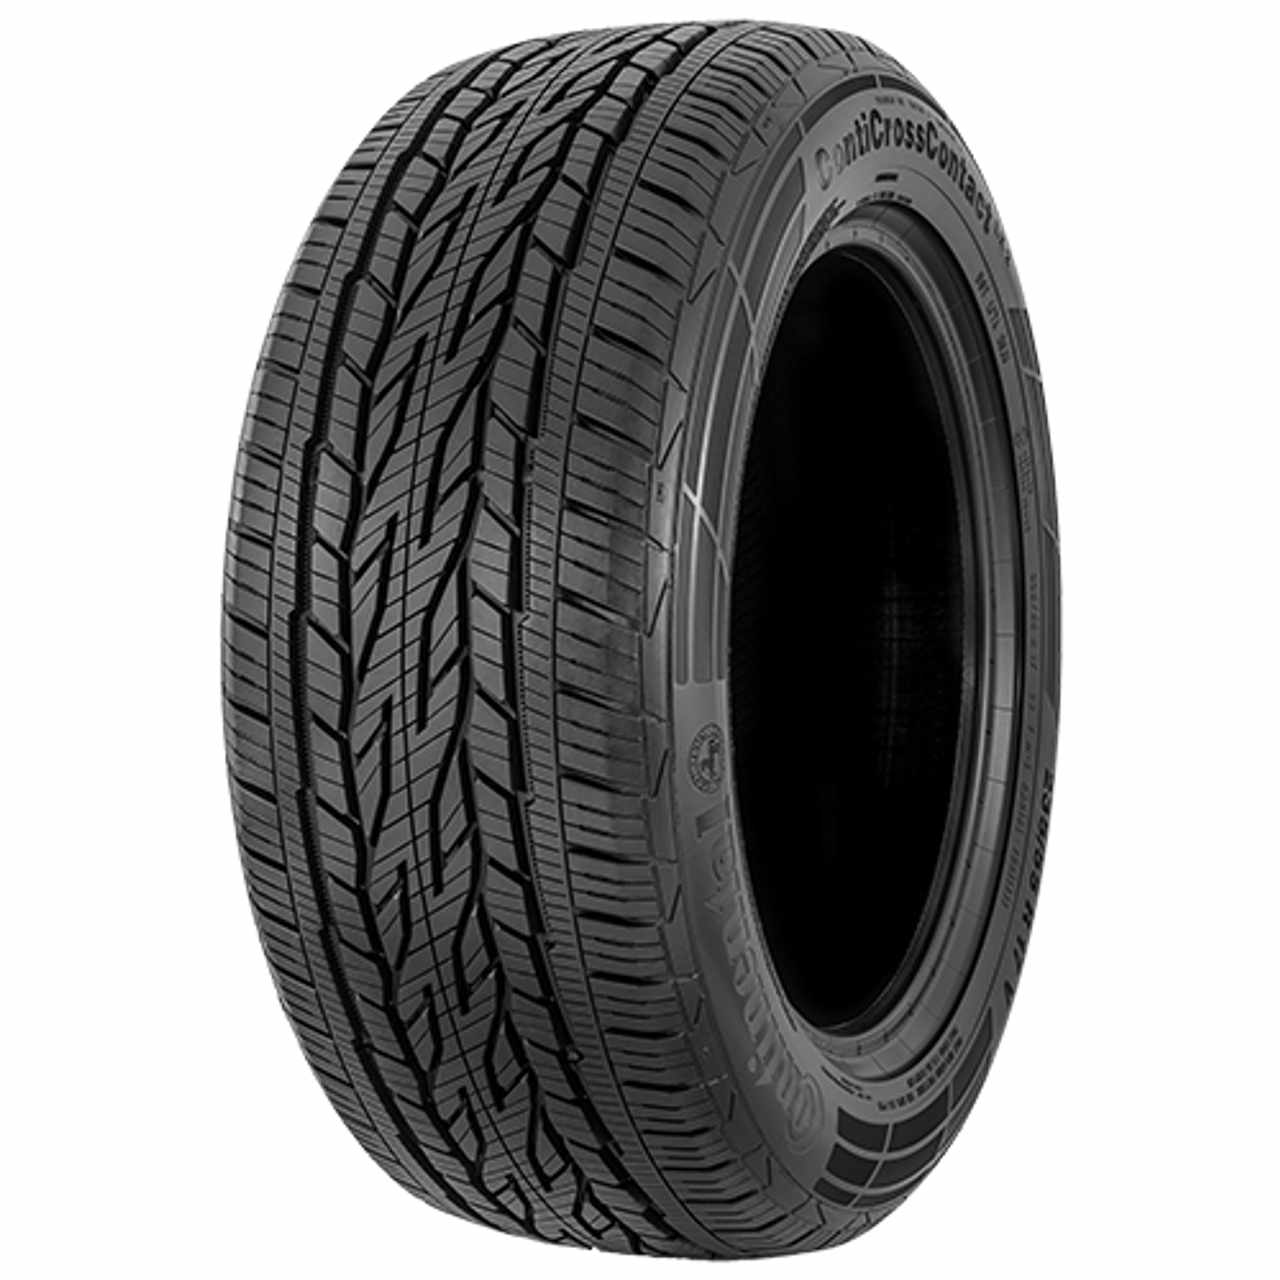 CONTINENTAL CONTICROSSCONTACT LX 2 (EVc) 215/60R17 96H FR BSW